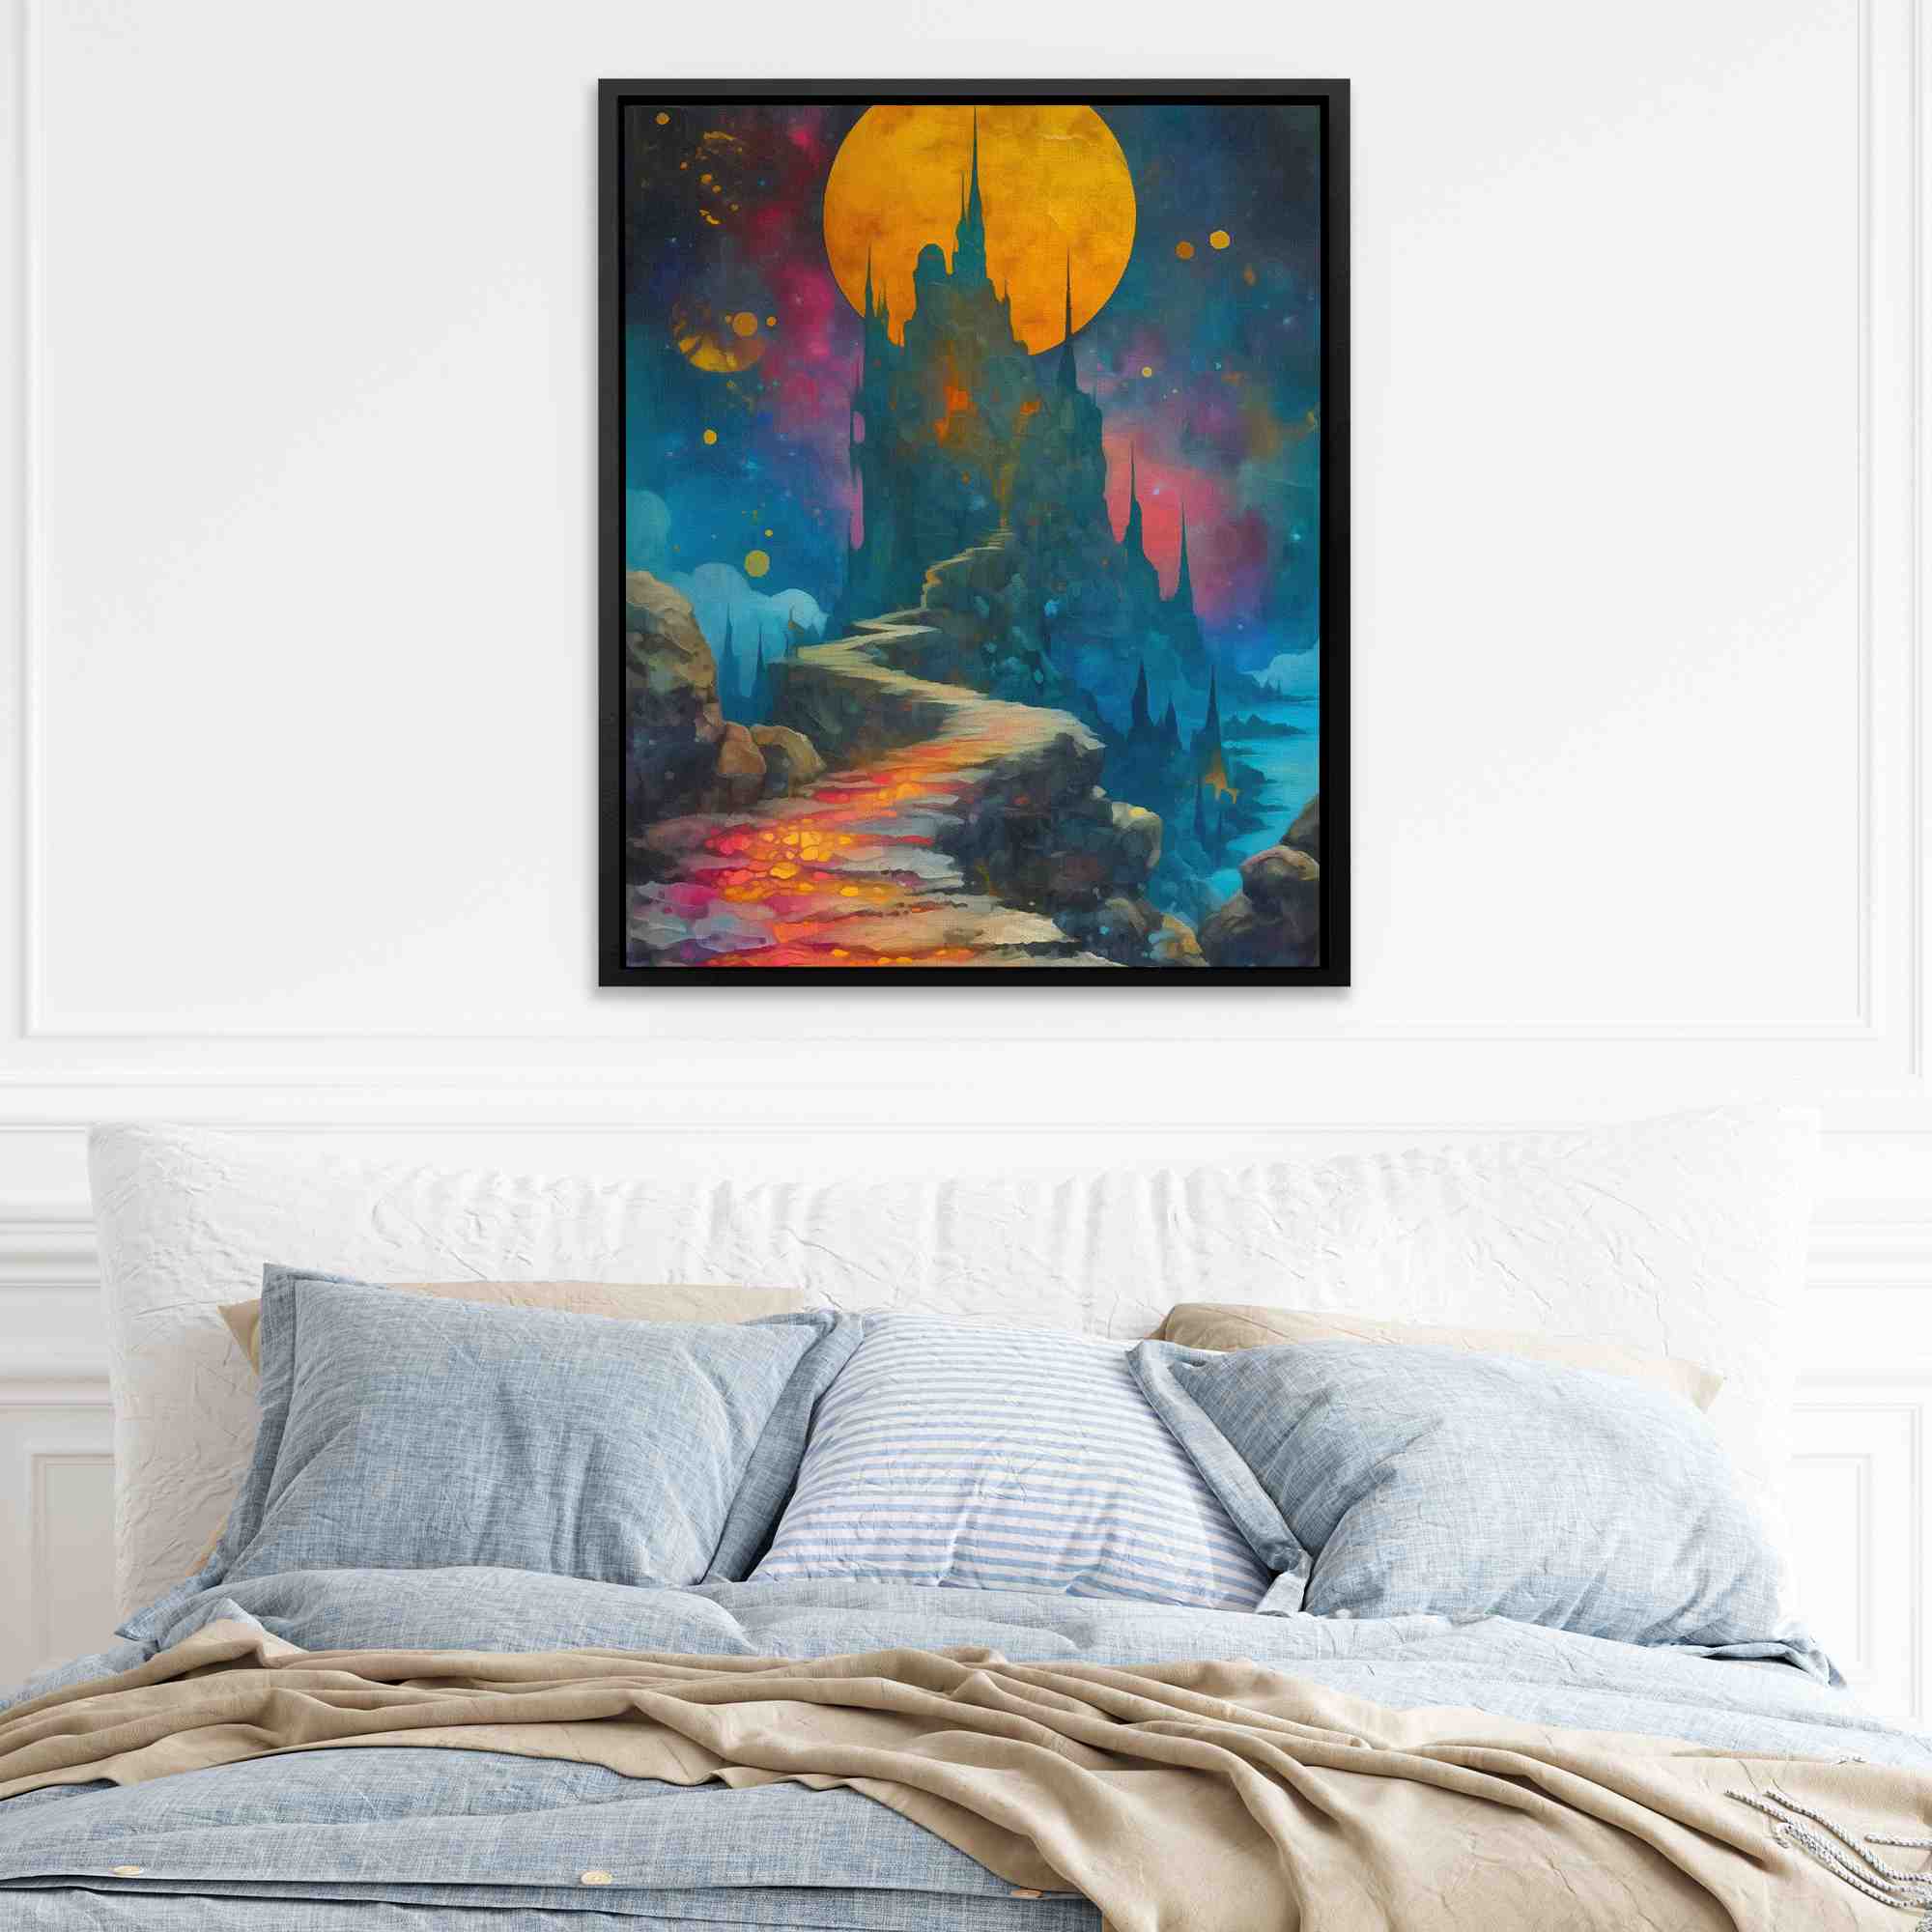 a painting of a castle in the night sky